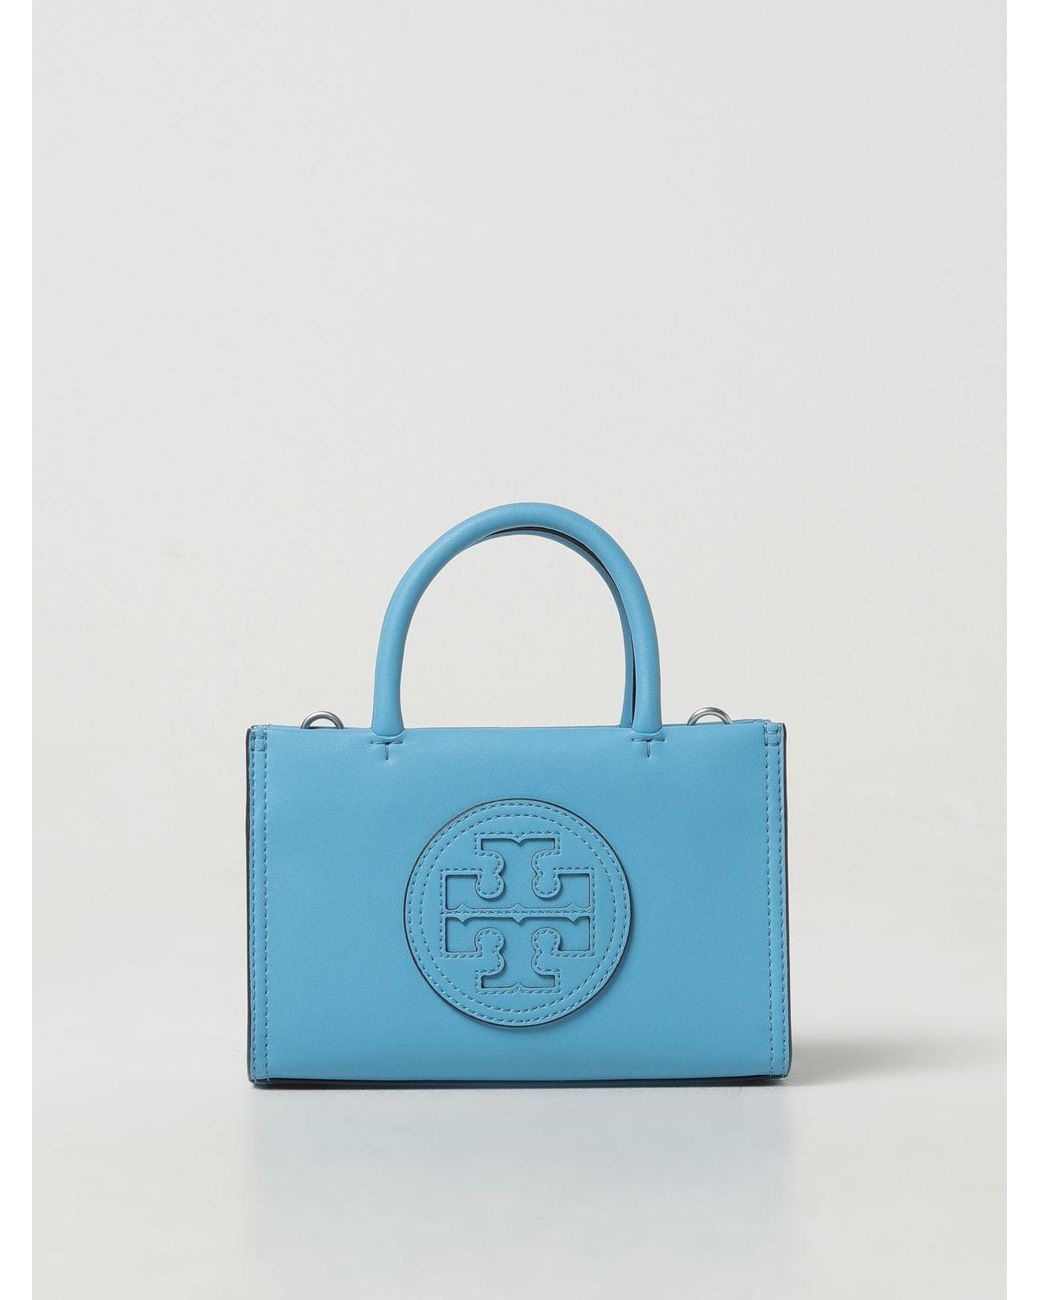 Tory Burch Indonesia Official Website